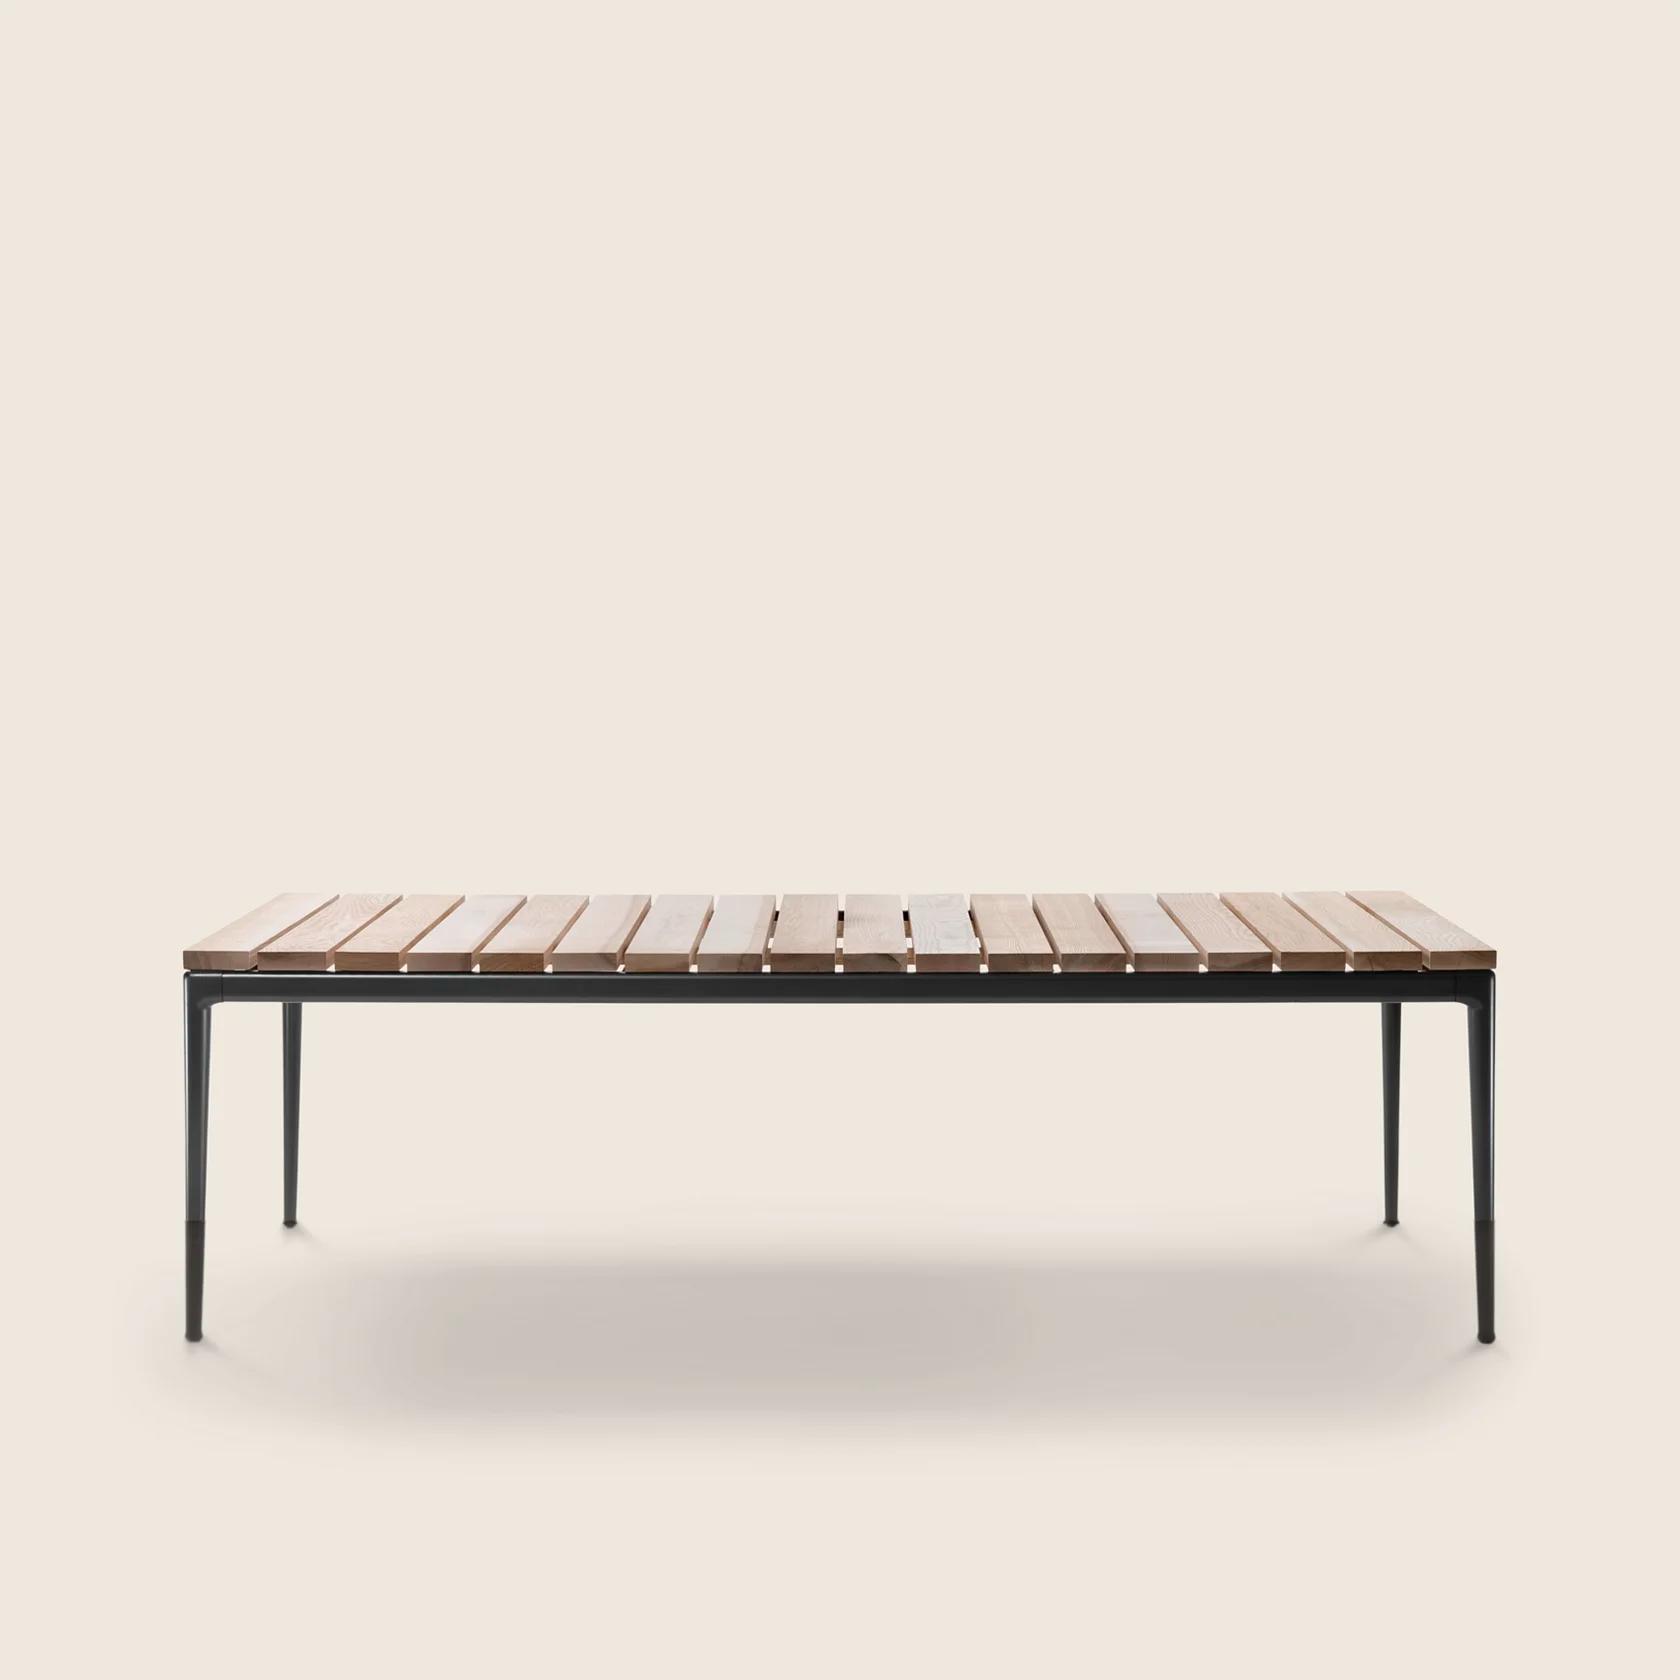 0283L0_PICO OUTDOOR_TABLE_03.png